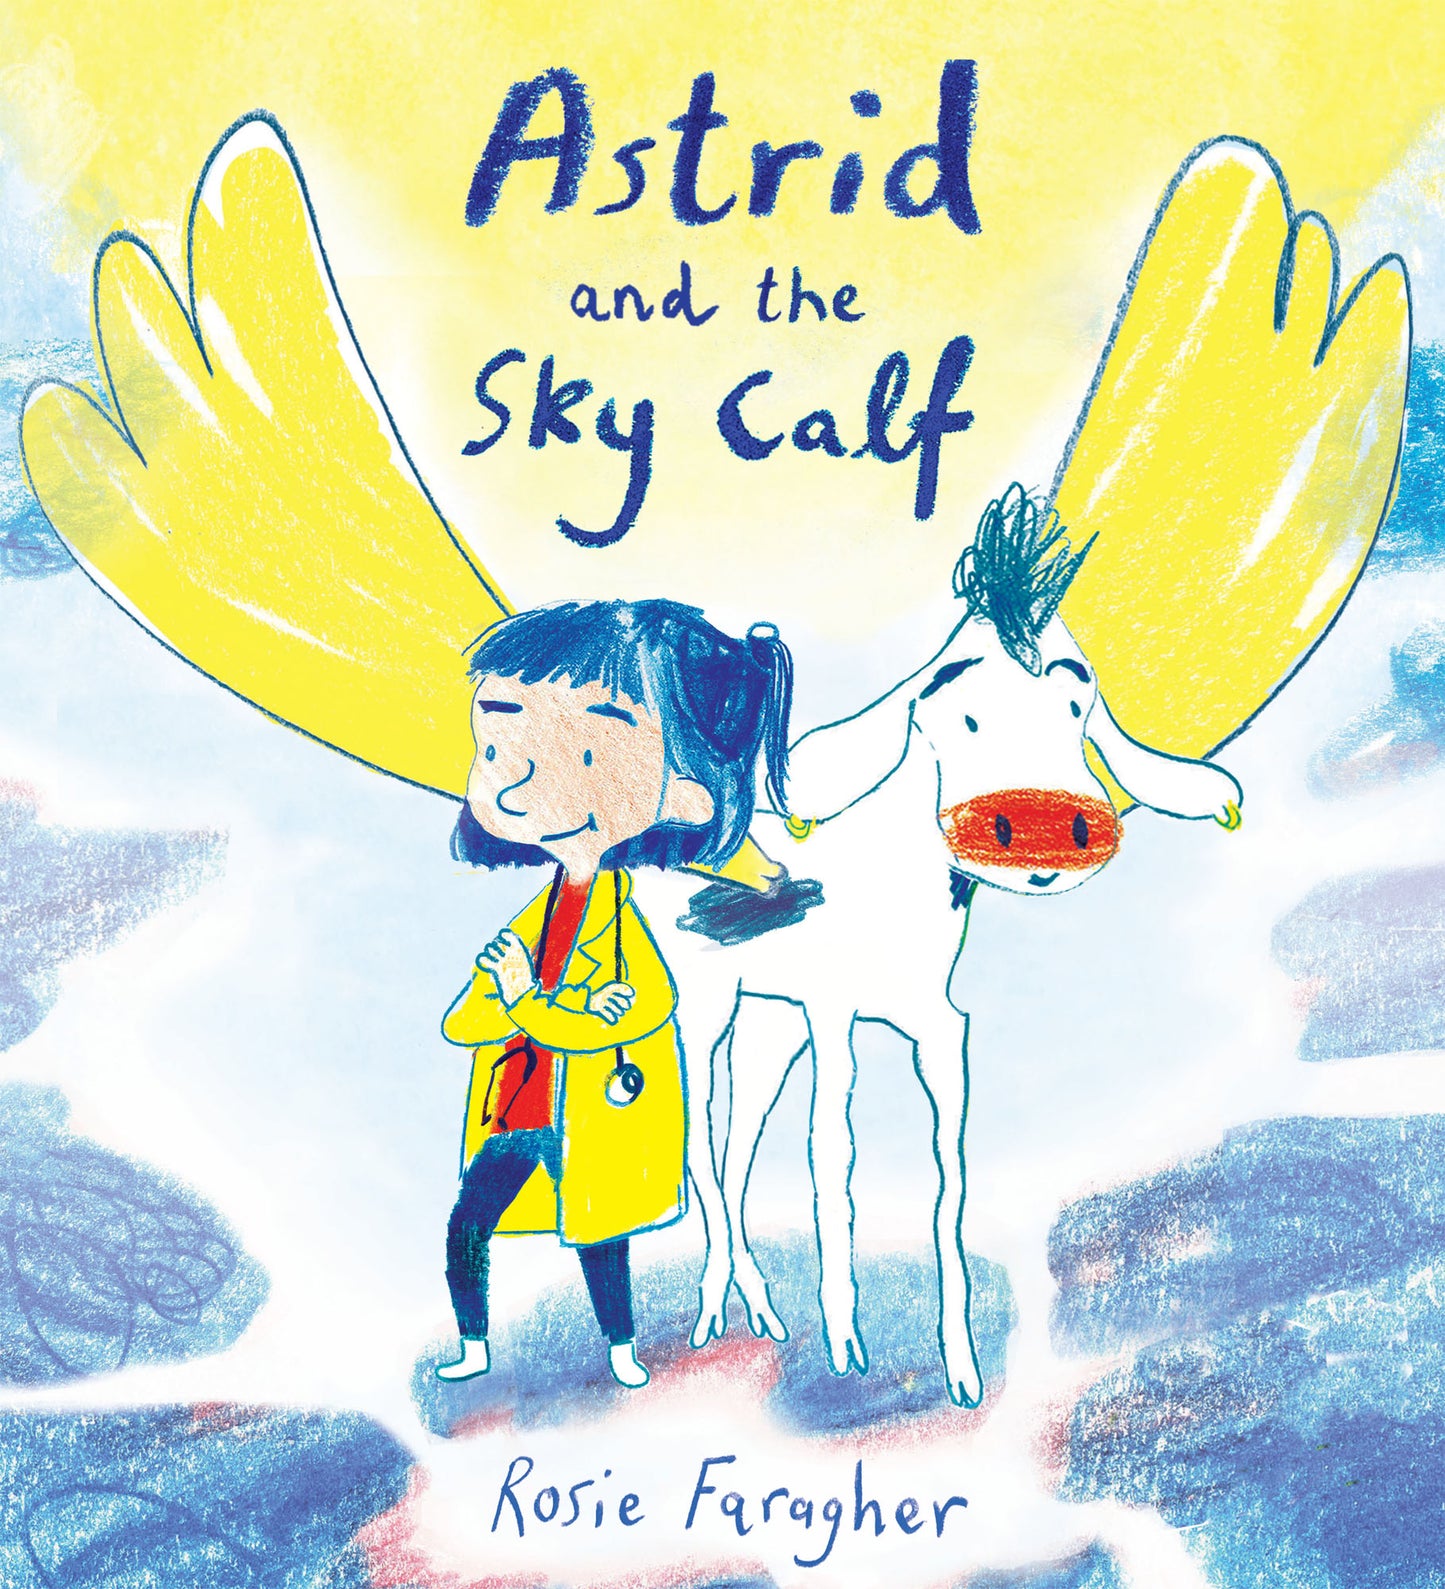 Astrid and the Sky Calf (Softcover Edition)